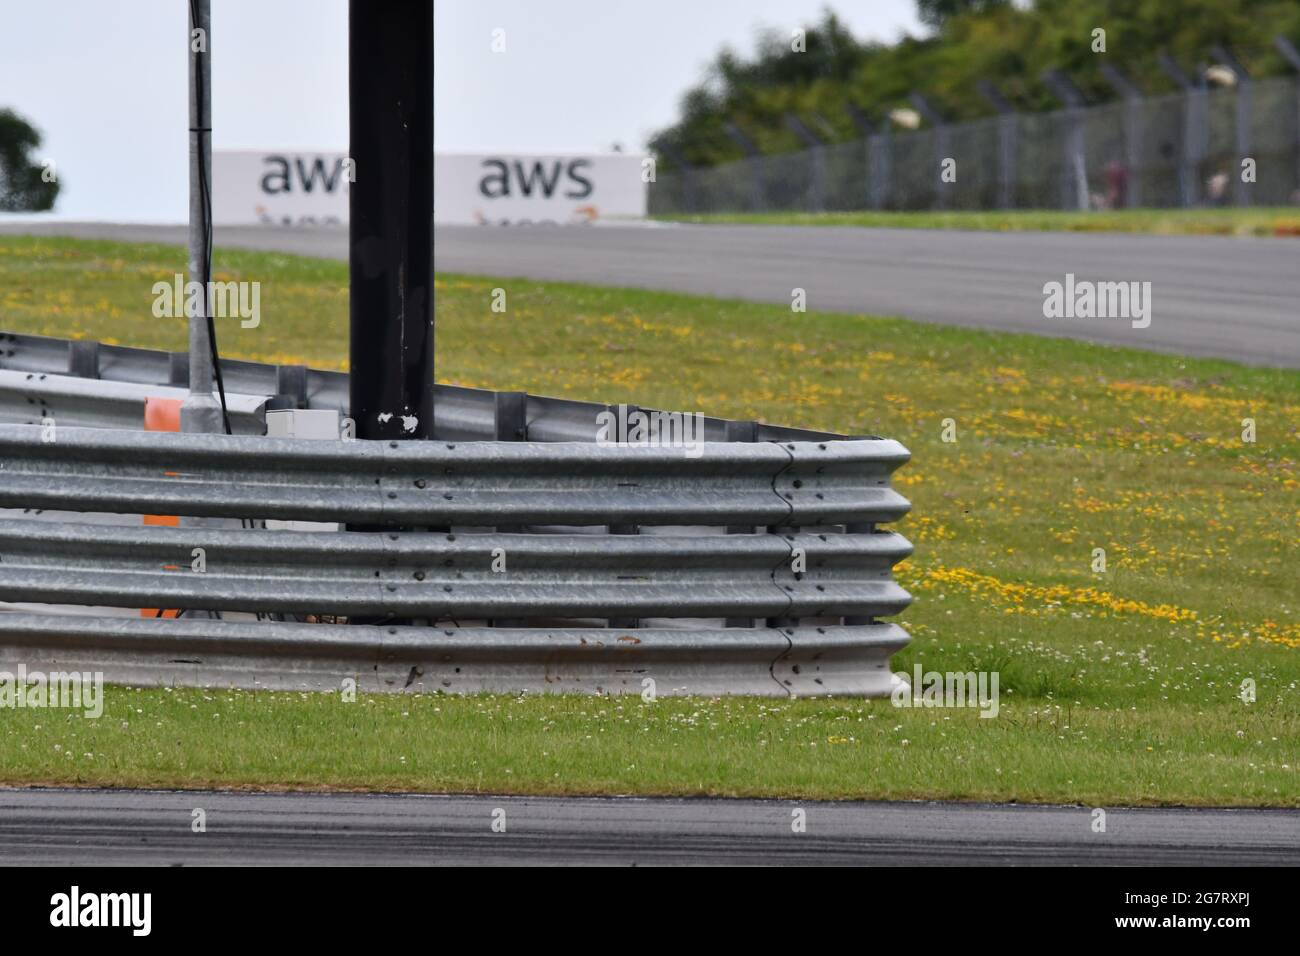 A corner of a racing car track with its protective barrier and security fencing Stock Photo